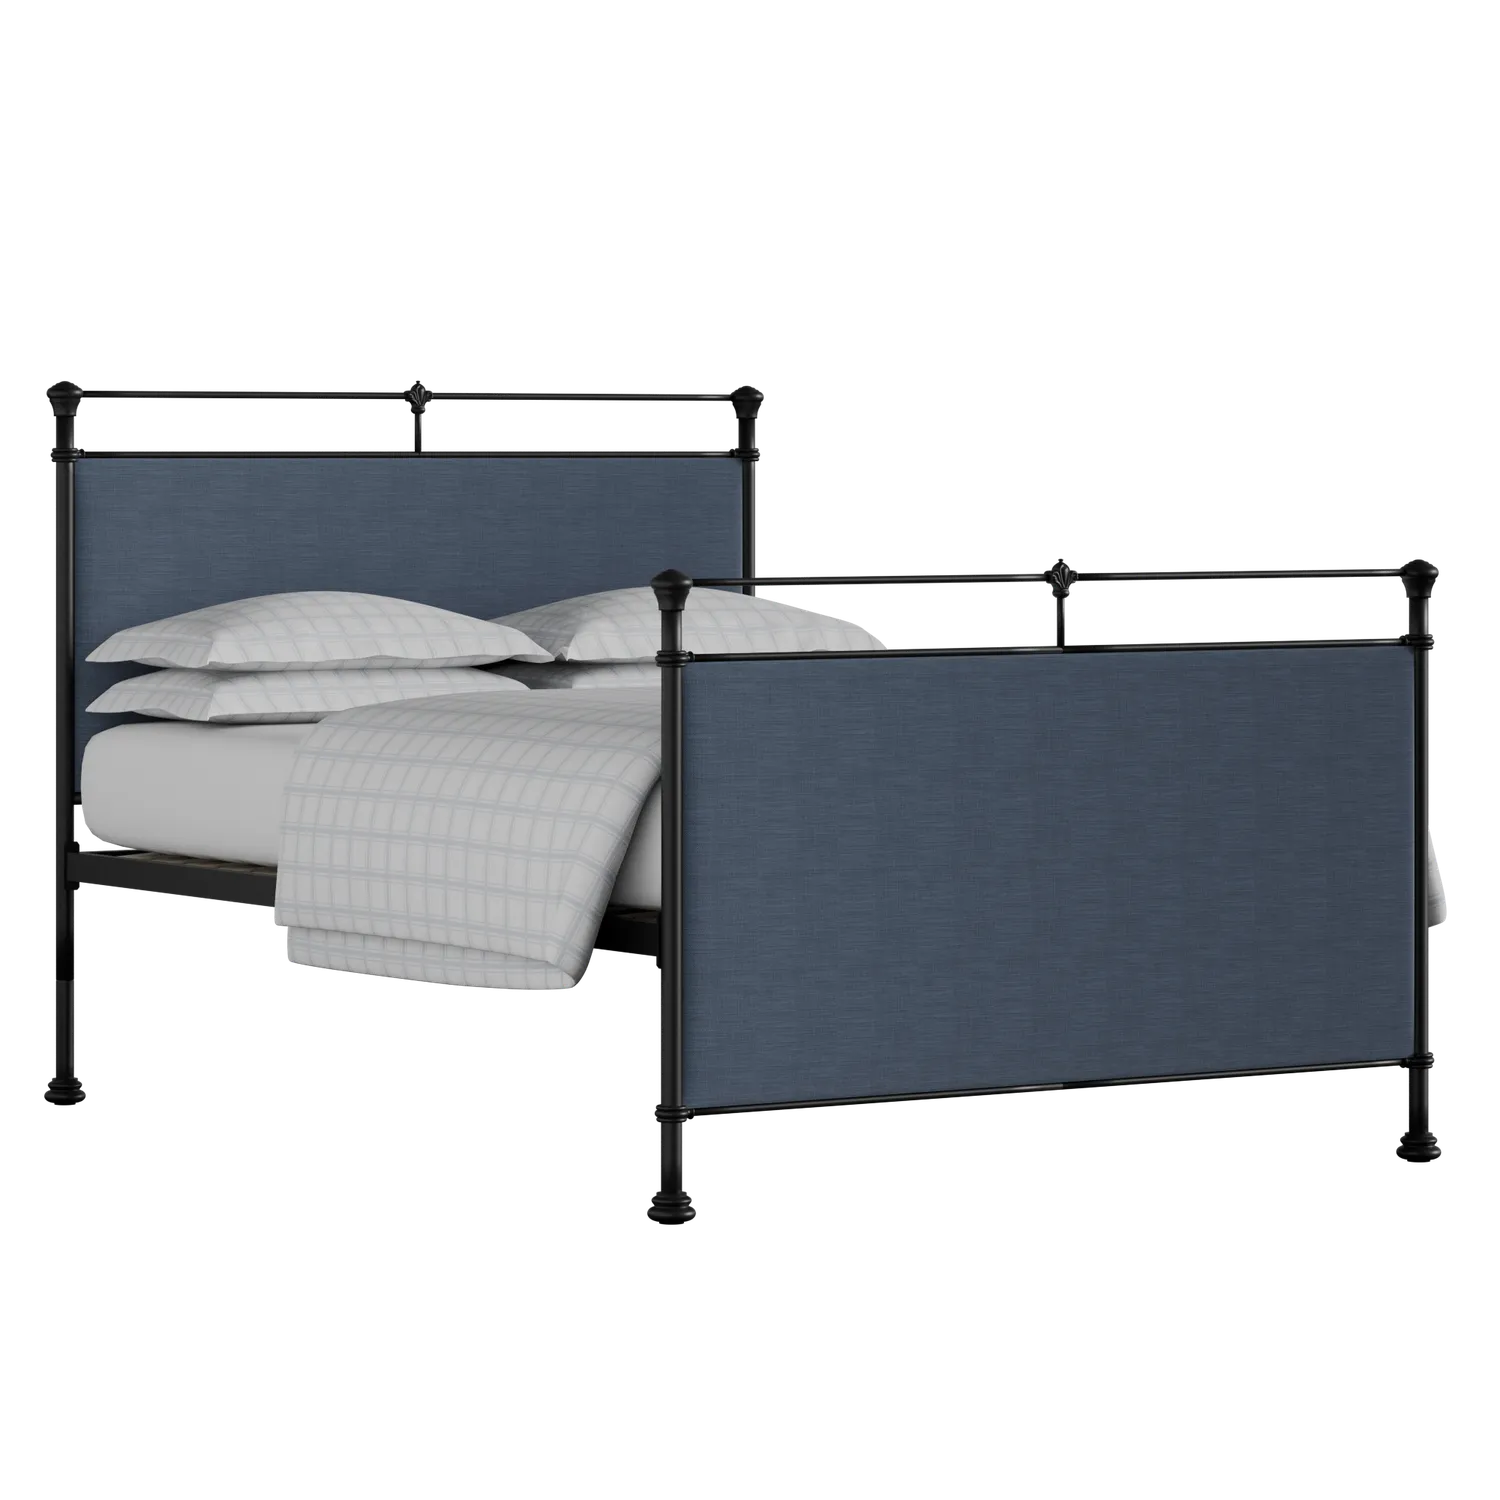 Lille iron/metal upholstered bed in black with blue fabric